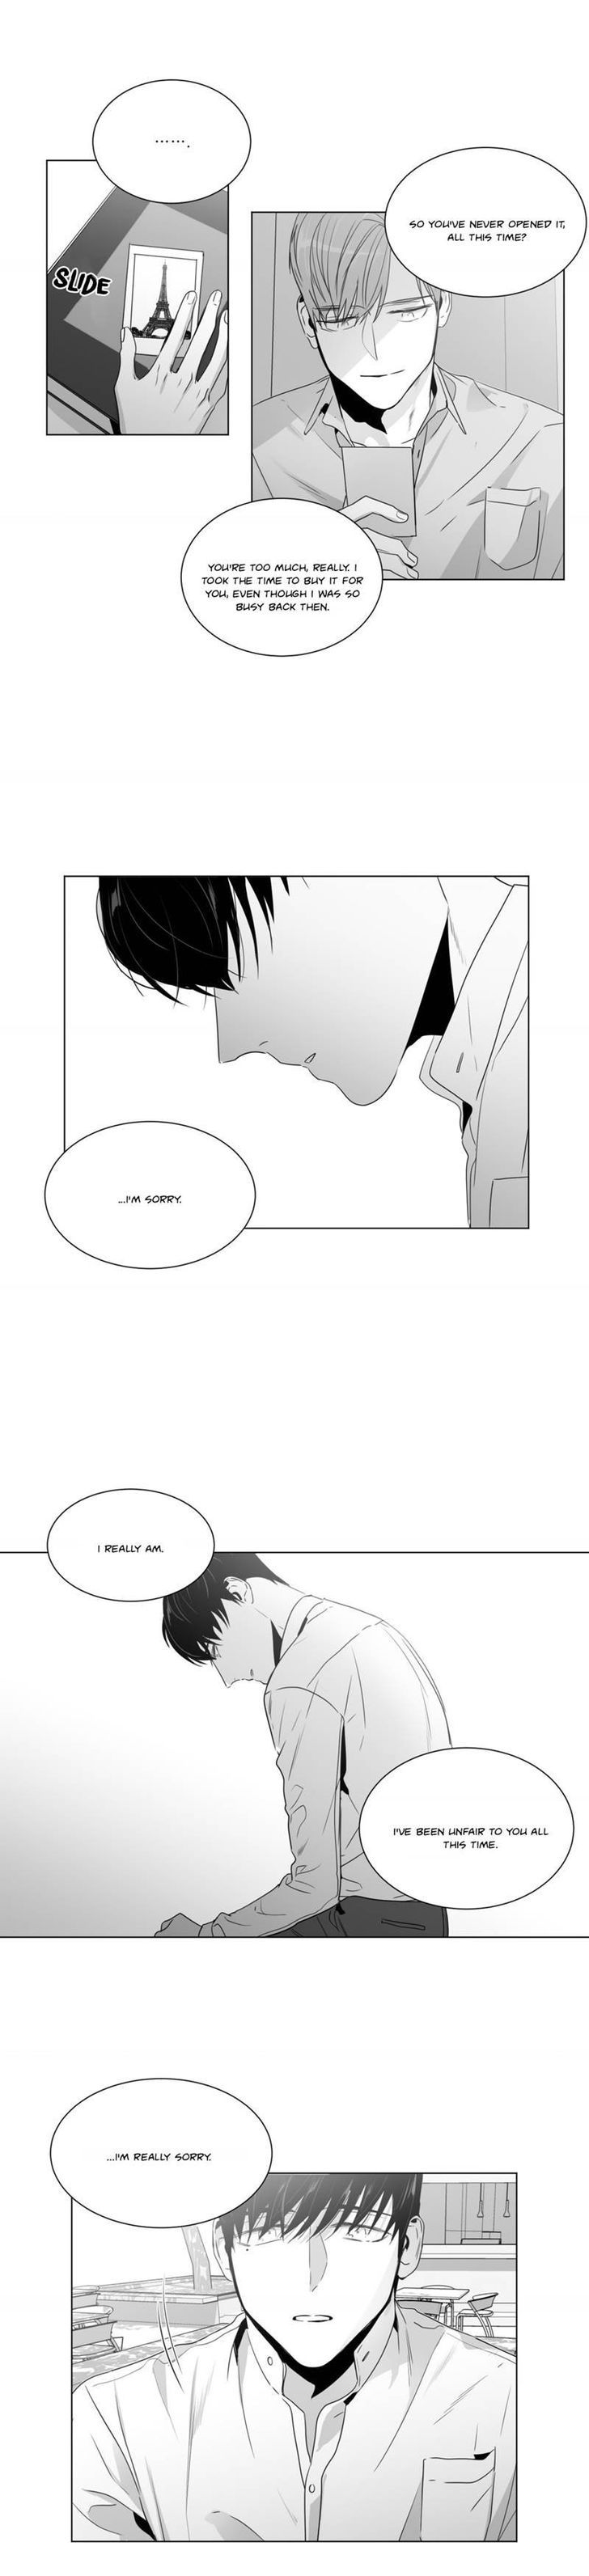 Lover Boy (Lezhin) Chapter 037 page 6